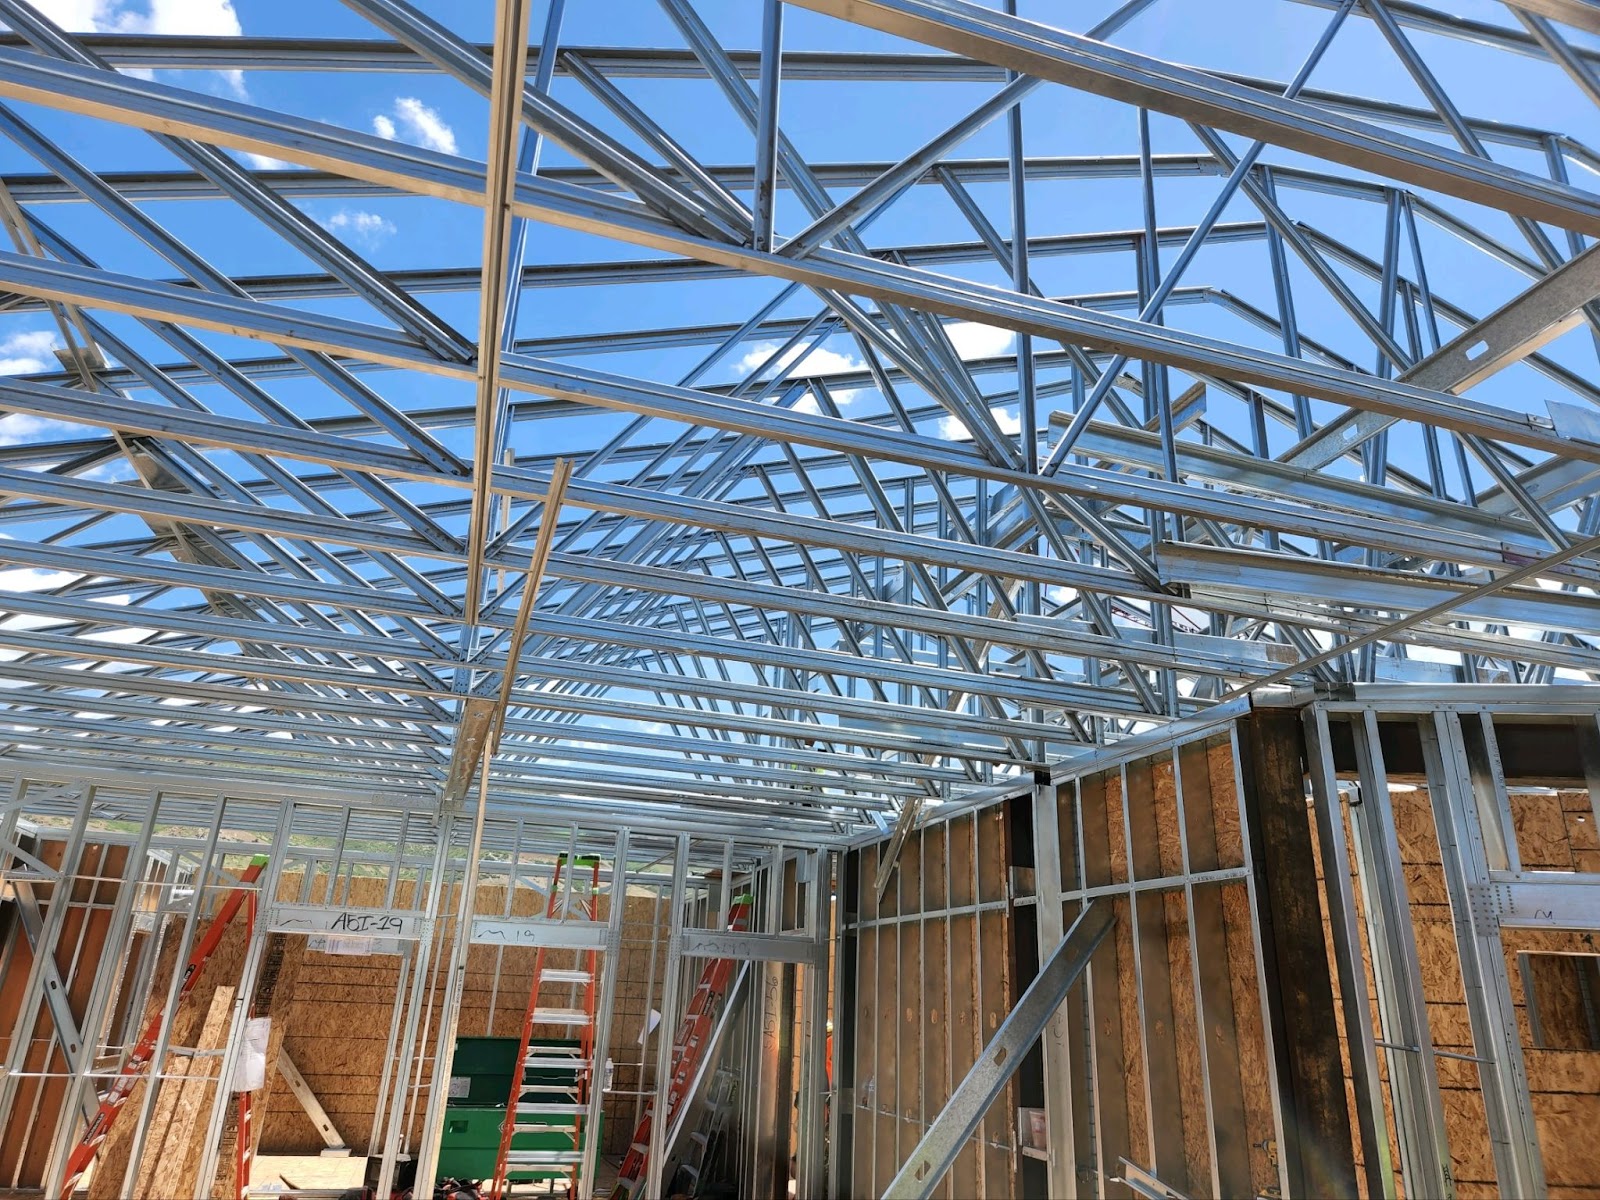 Construction of metal roof structure with prefabricated wall panels for added strength